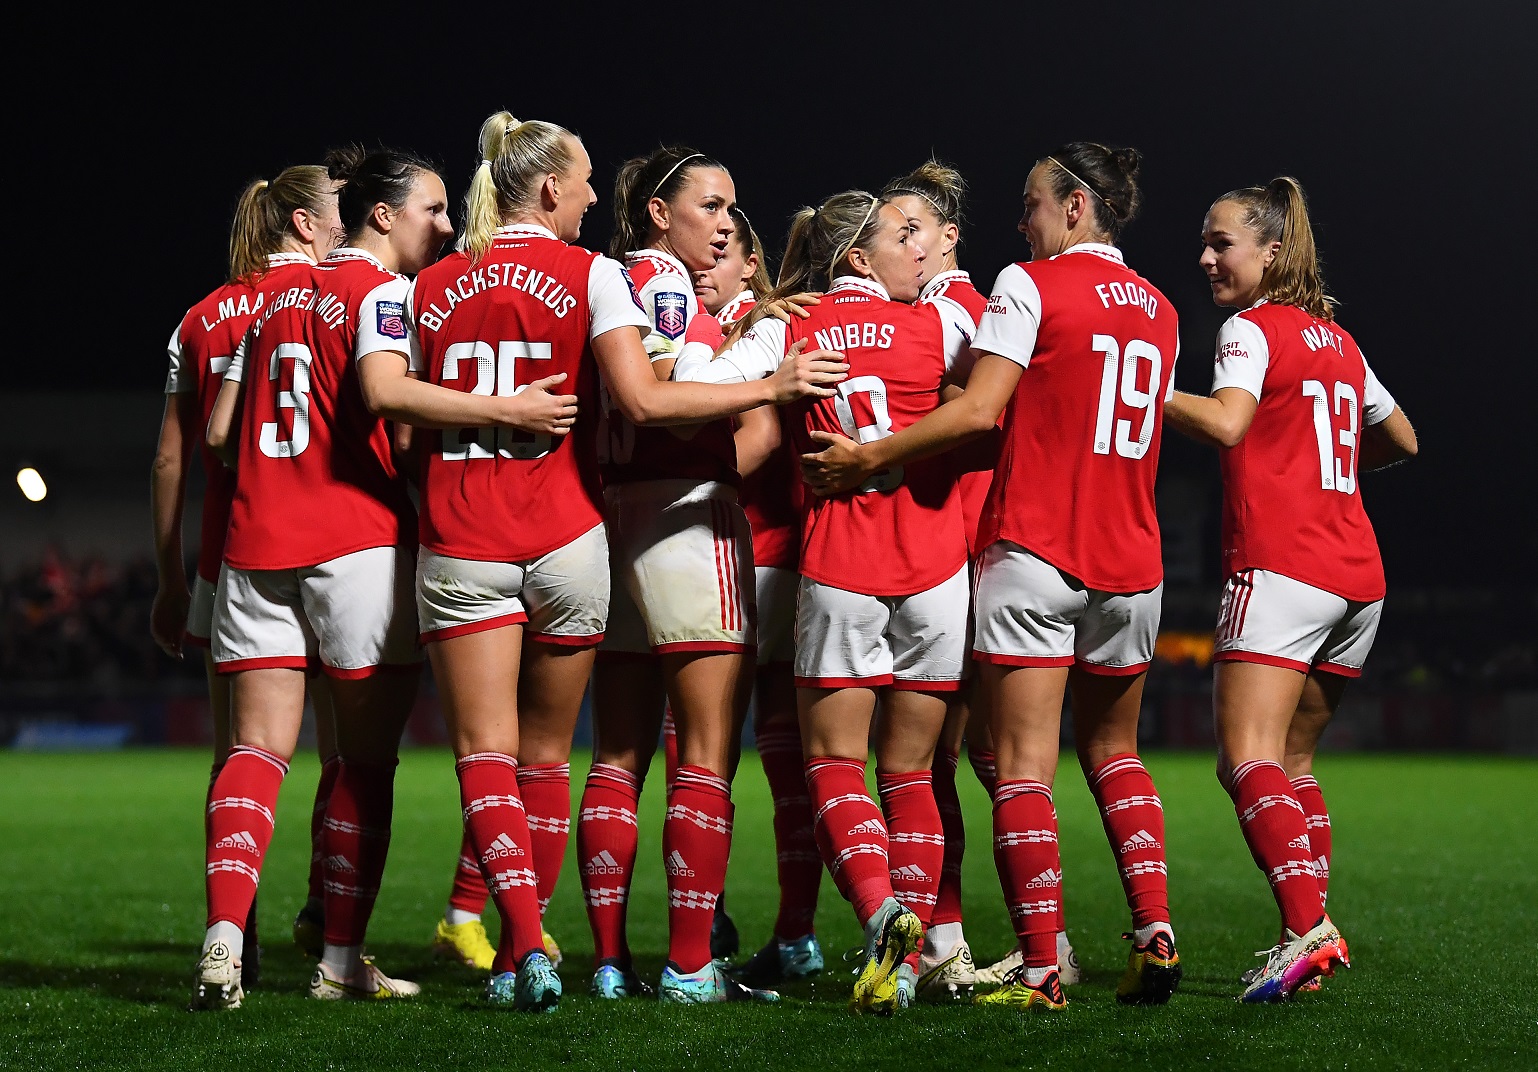 Arsenal to play three Women's Super League games at Emirates